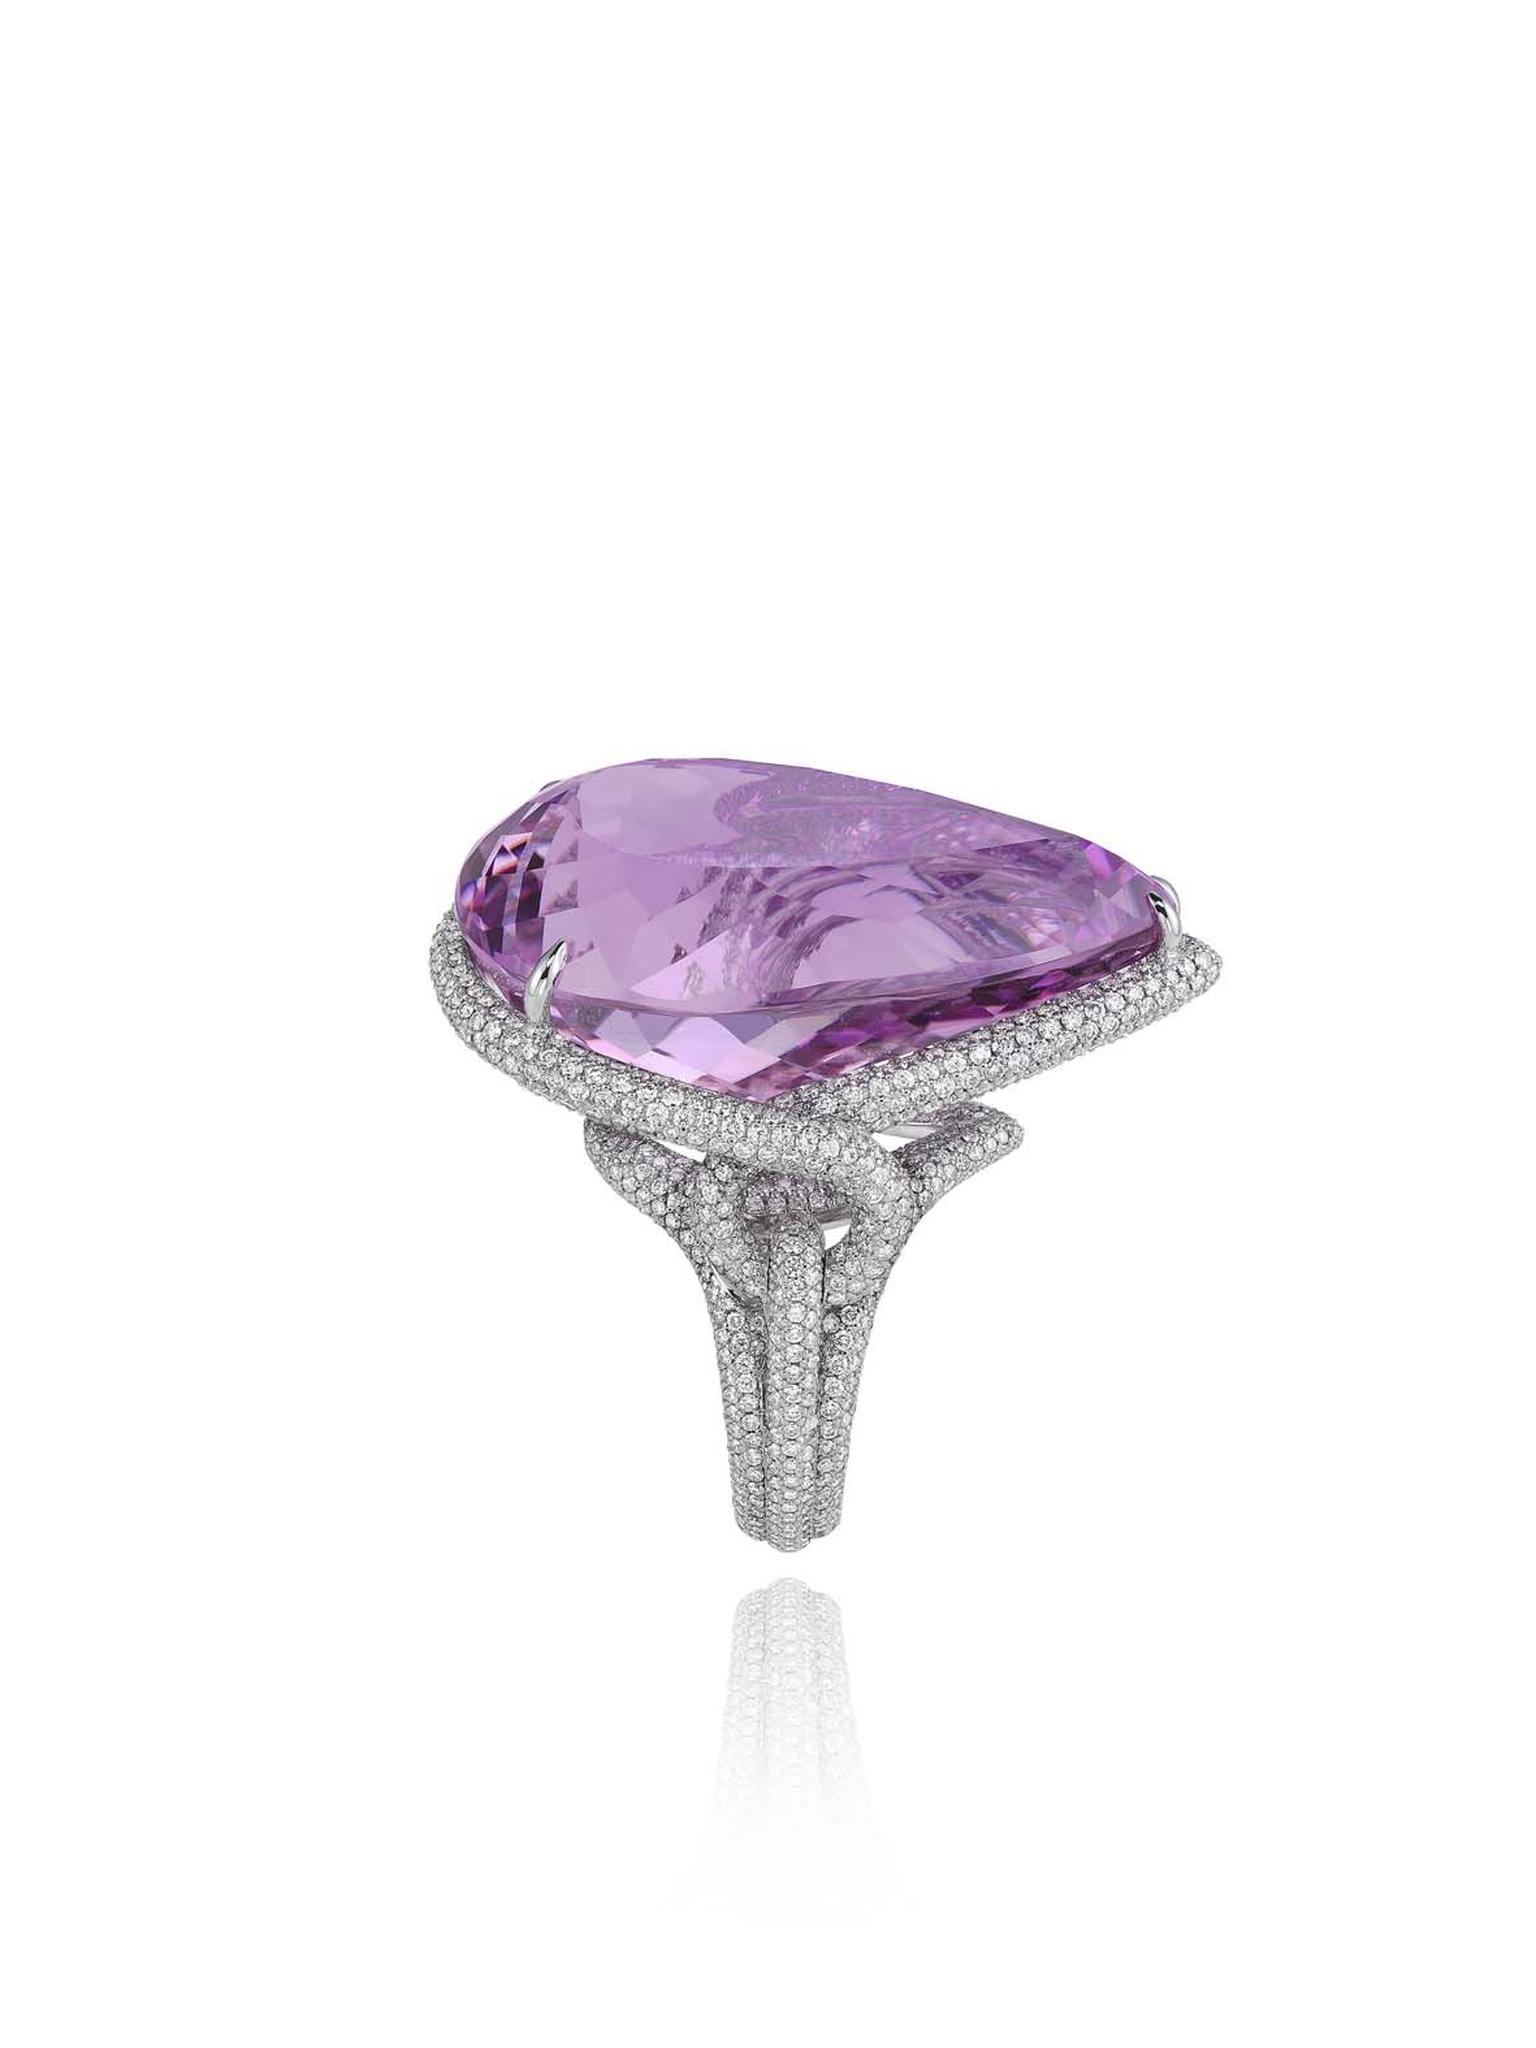 829174-1002 Kunzite Ring  from the Red Carpet Collection 2013ChopardChopard.jpg